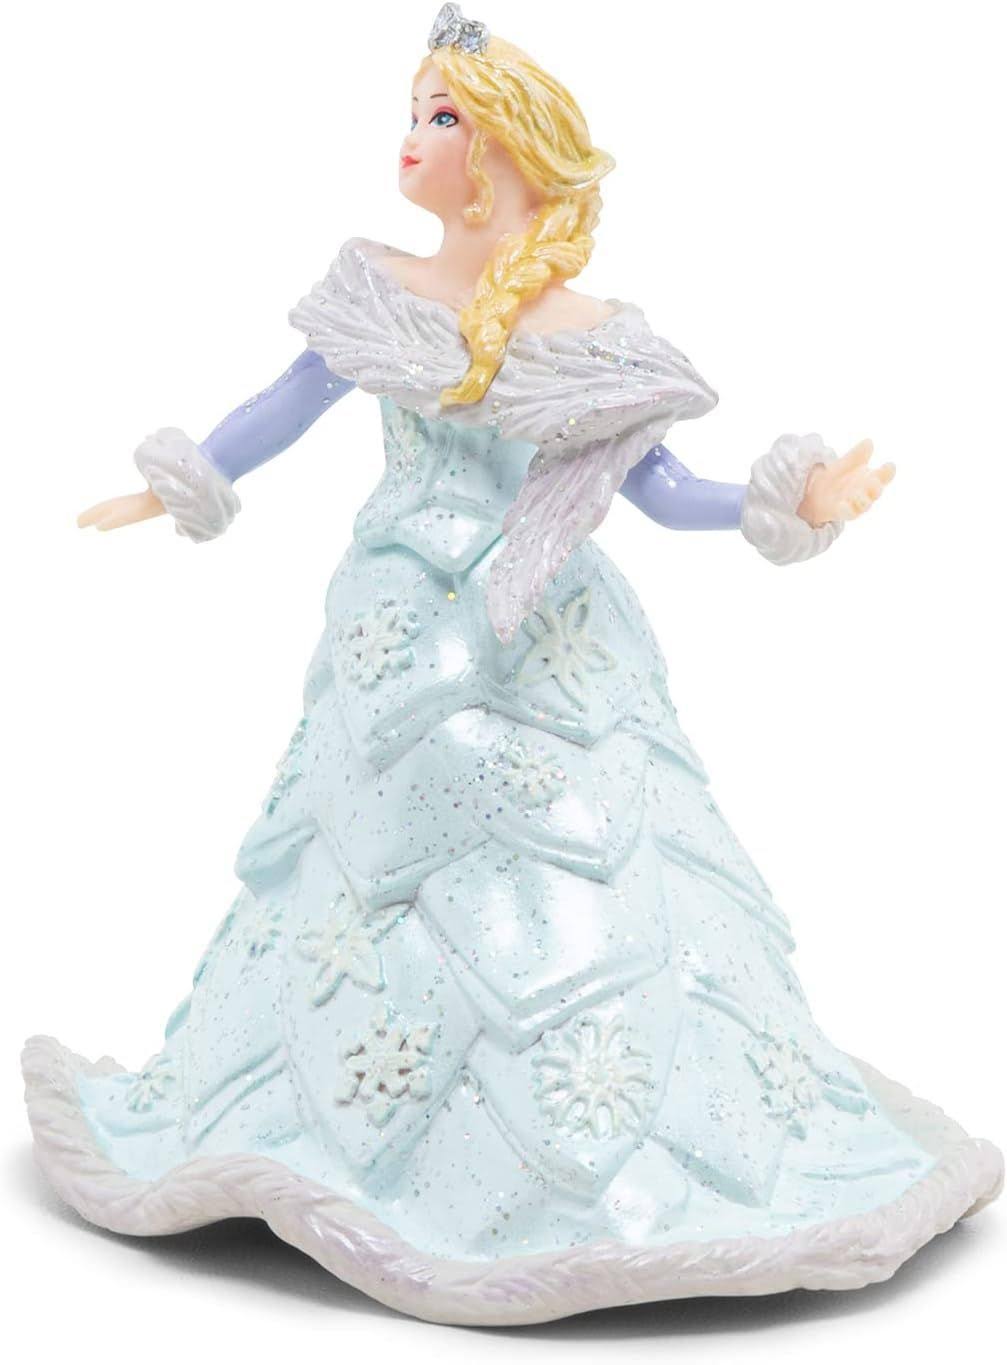 Papo The Enchanted World Figurine - Papo Ice Queen